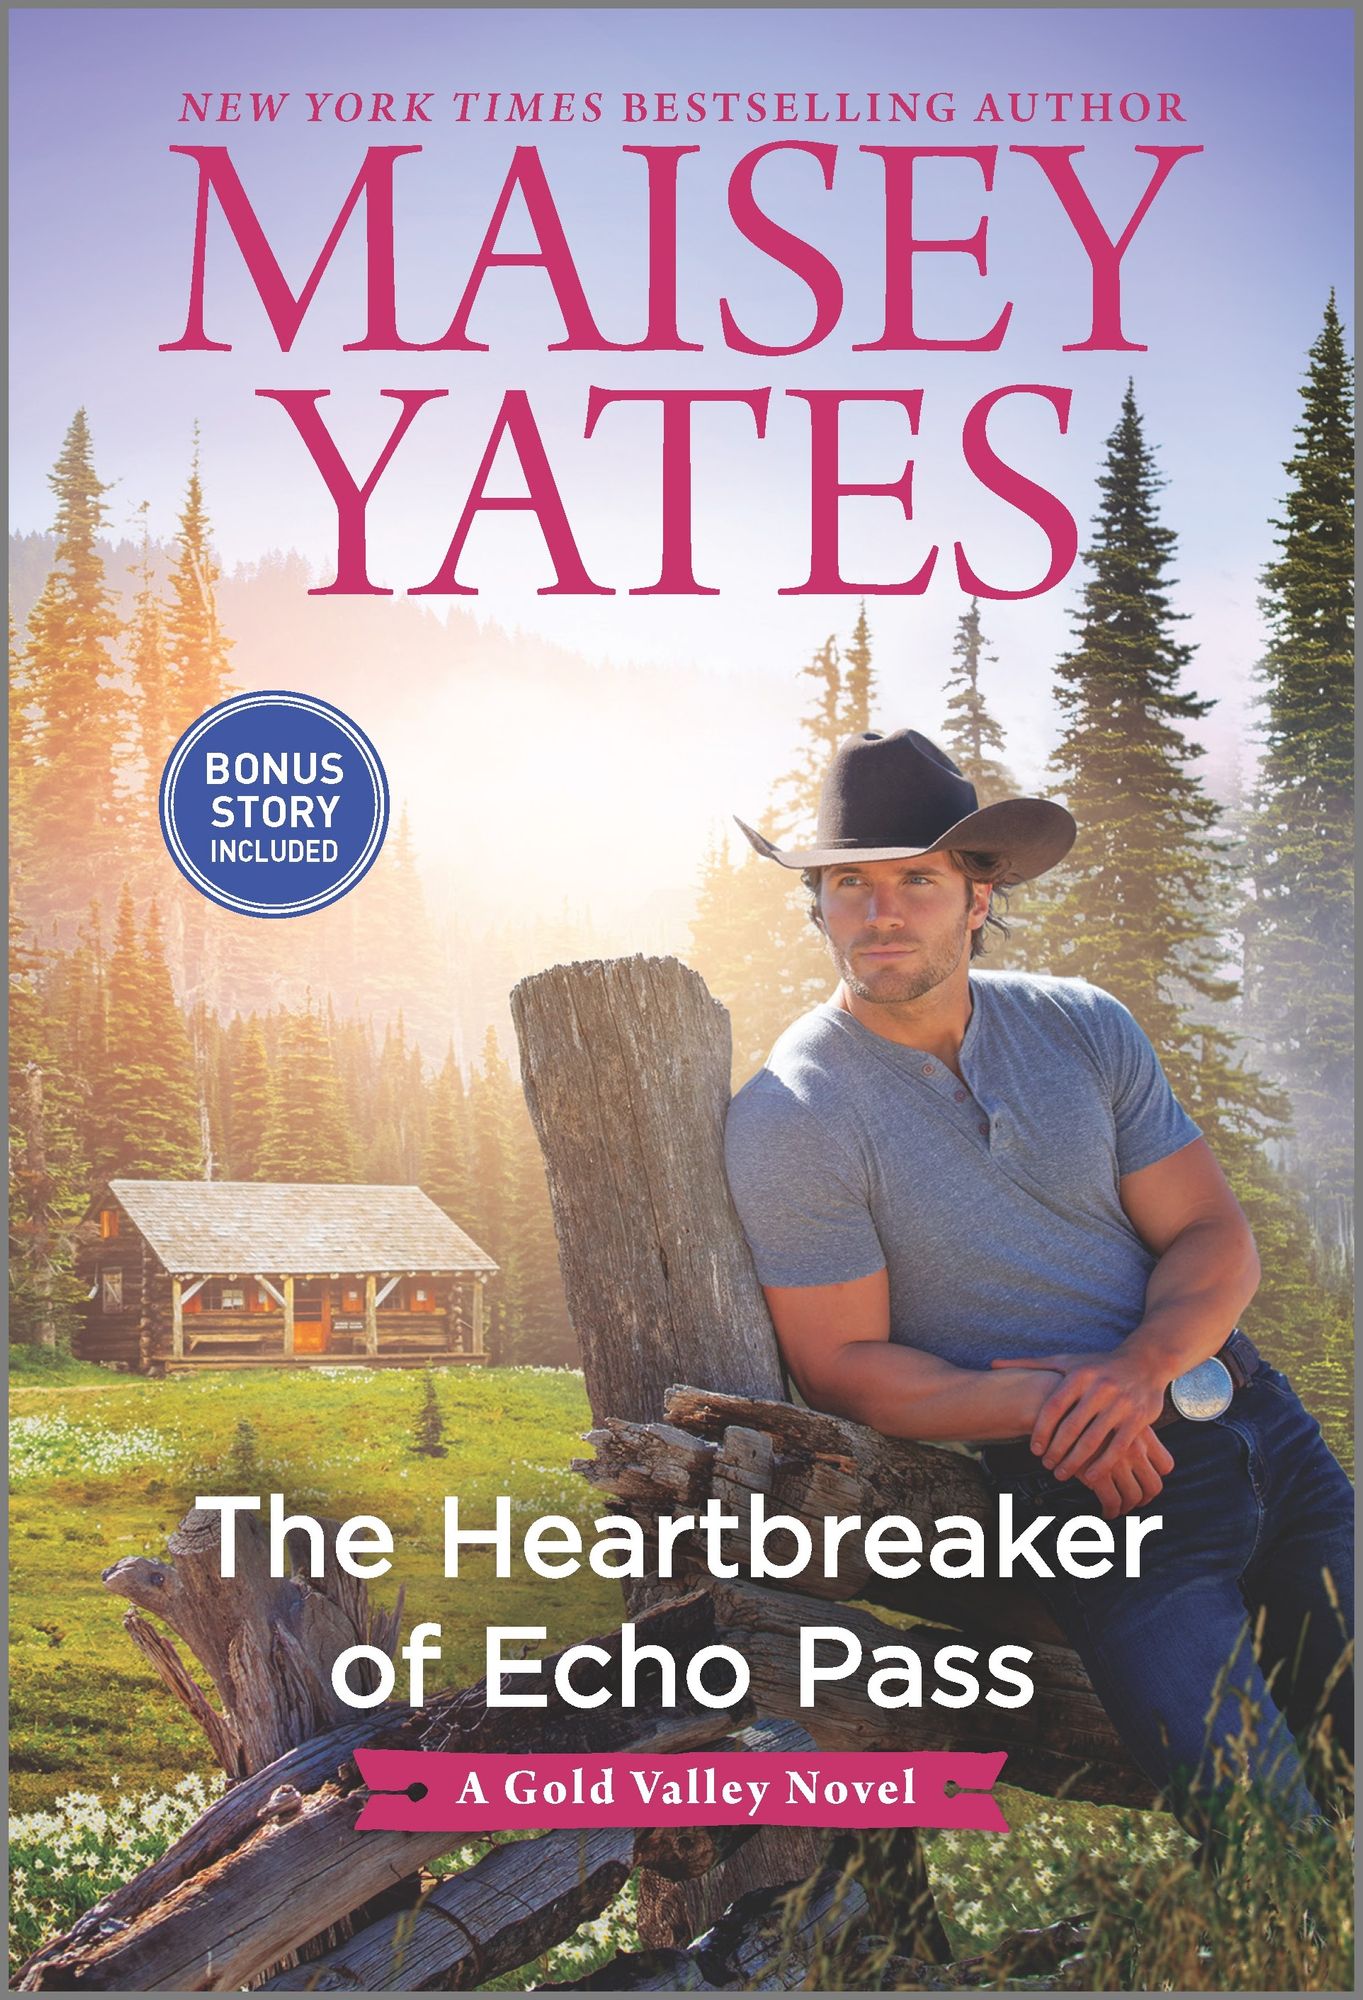 The Heartbreaker of Echo Pass by Maisey Yates